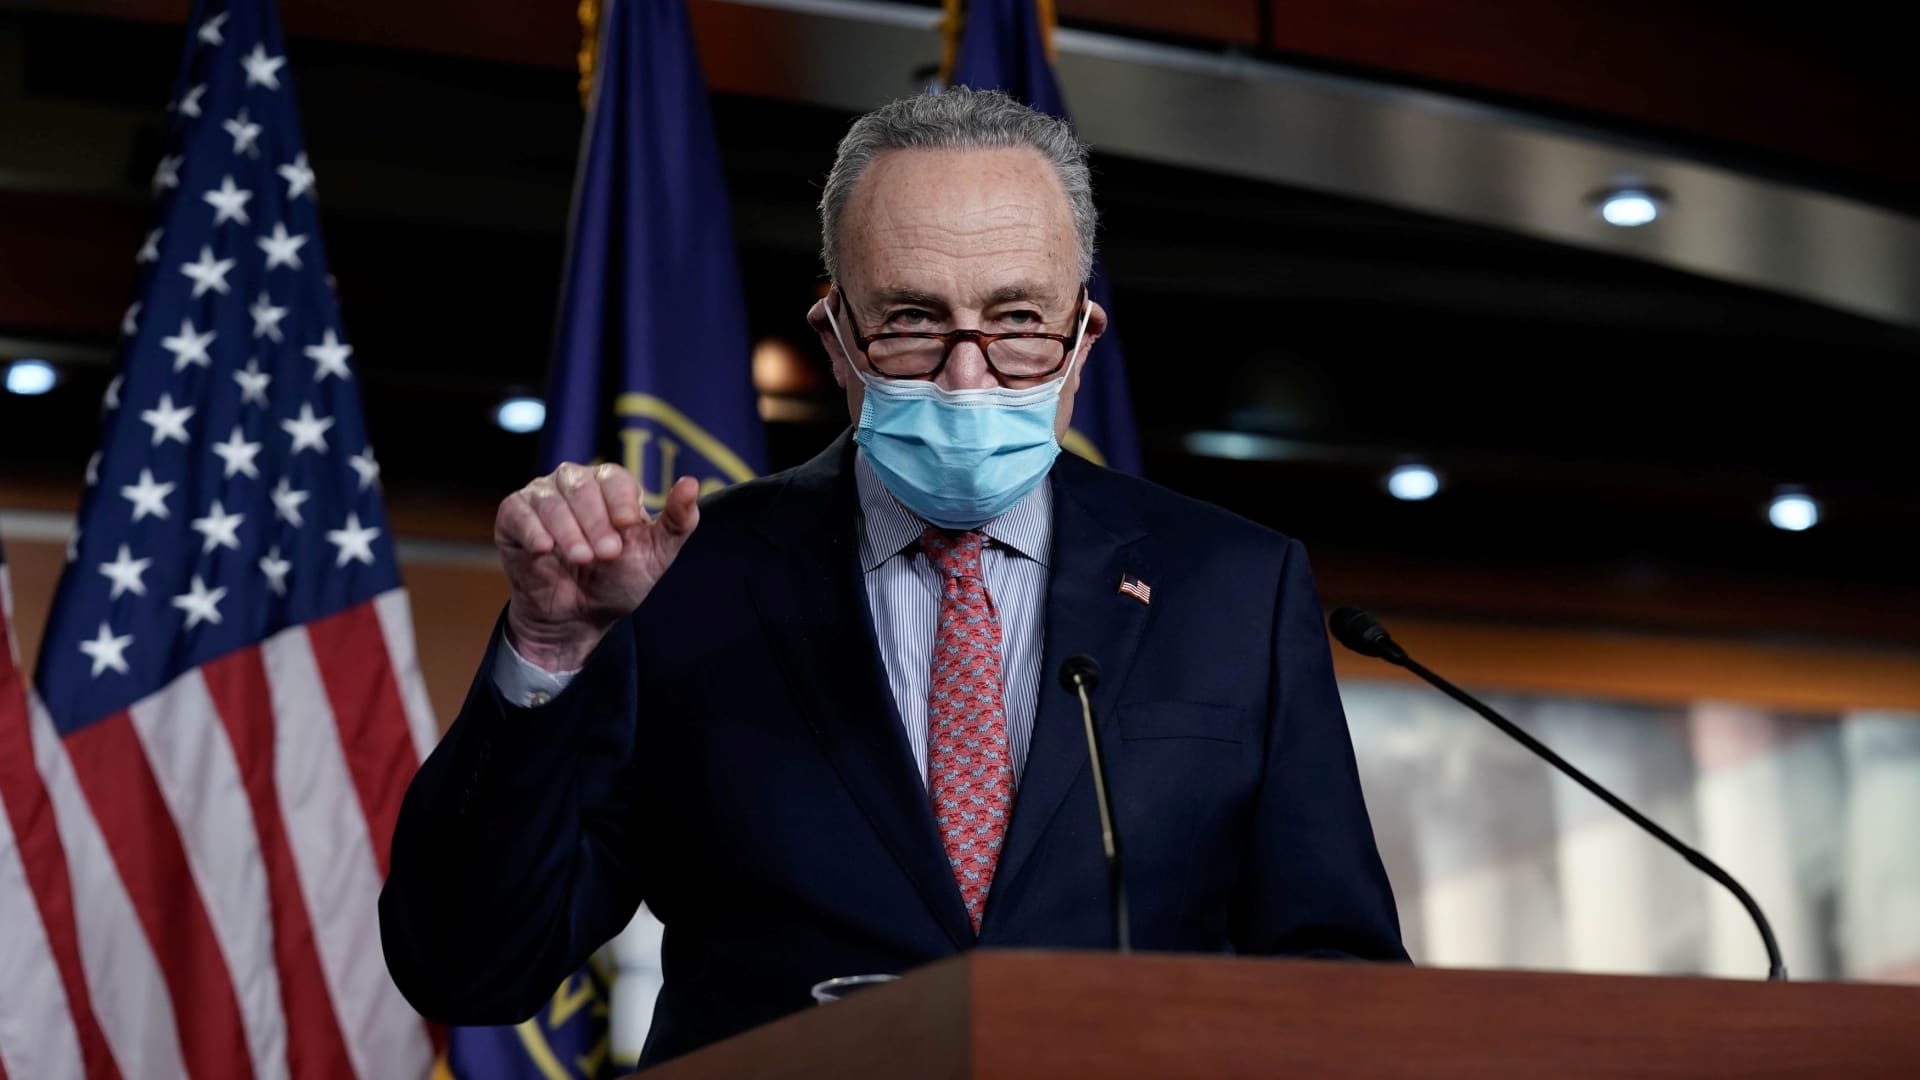 Senate Minority Leader Charles Schumer (D-NY) speaks to reporters on an agreement of a coronavirus disease (COVID-19) aid package on Capitol Hill in Washington, D.C., U.S. December 20, 2020.